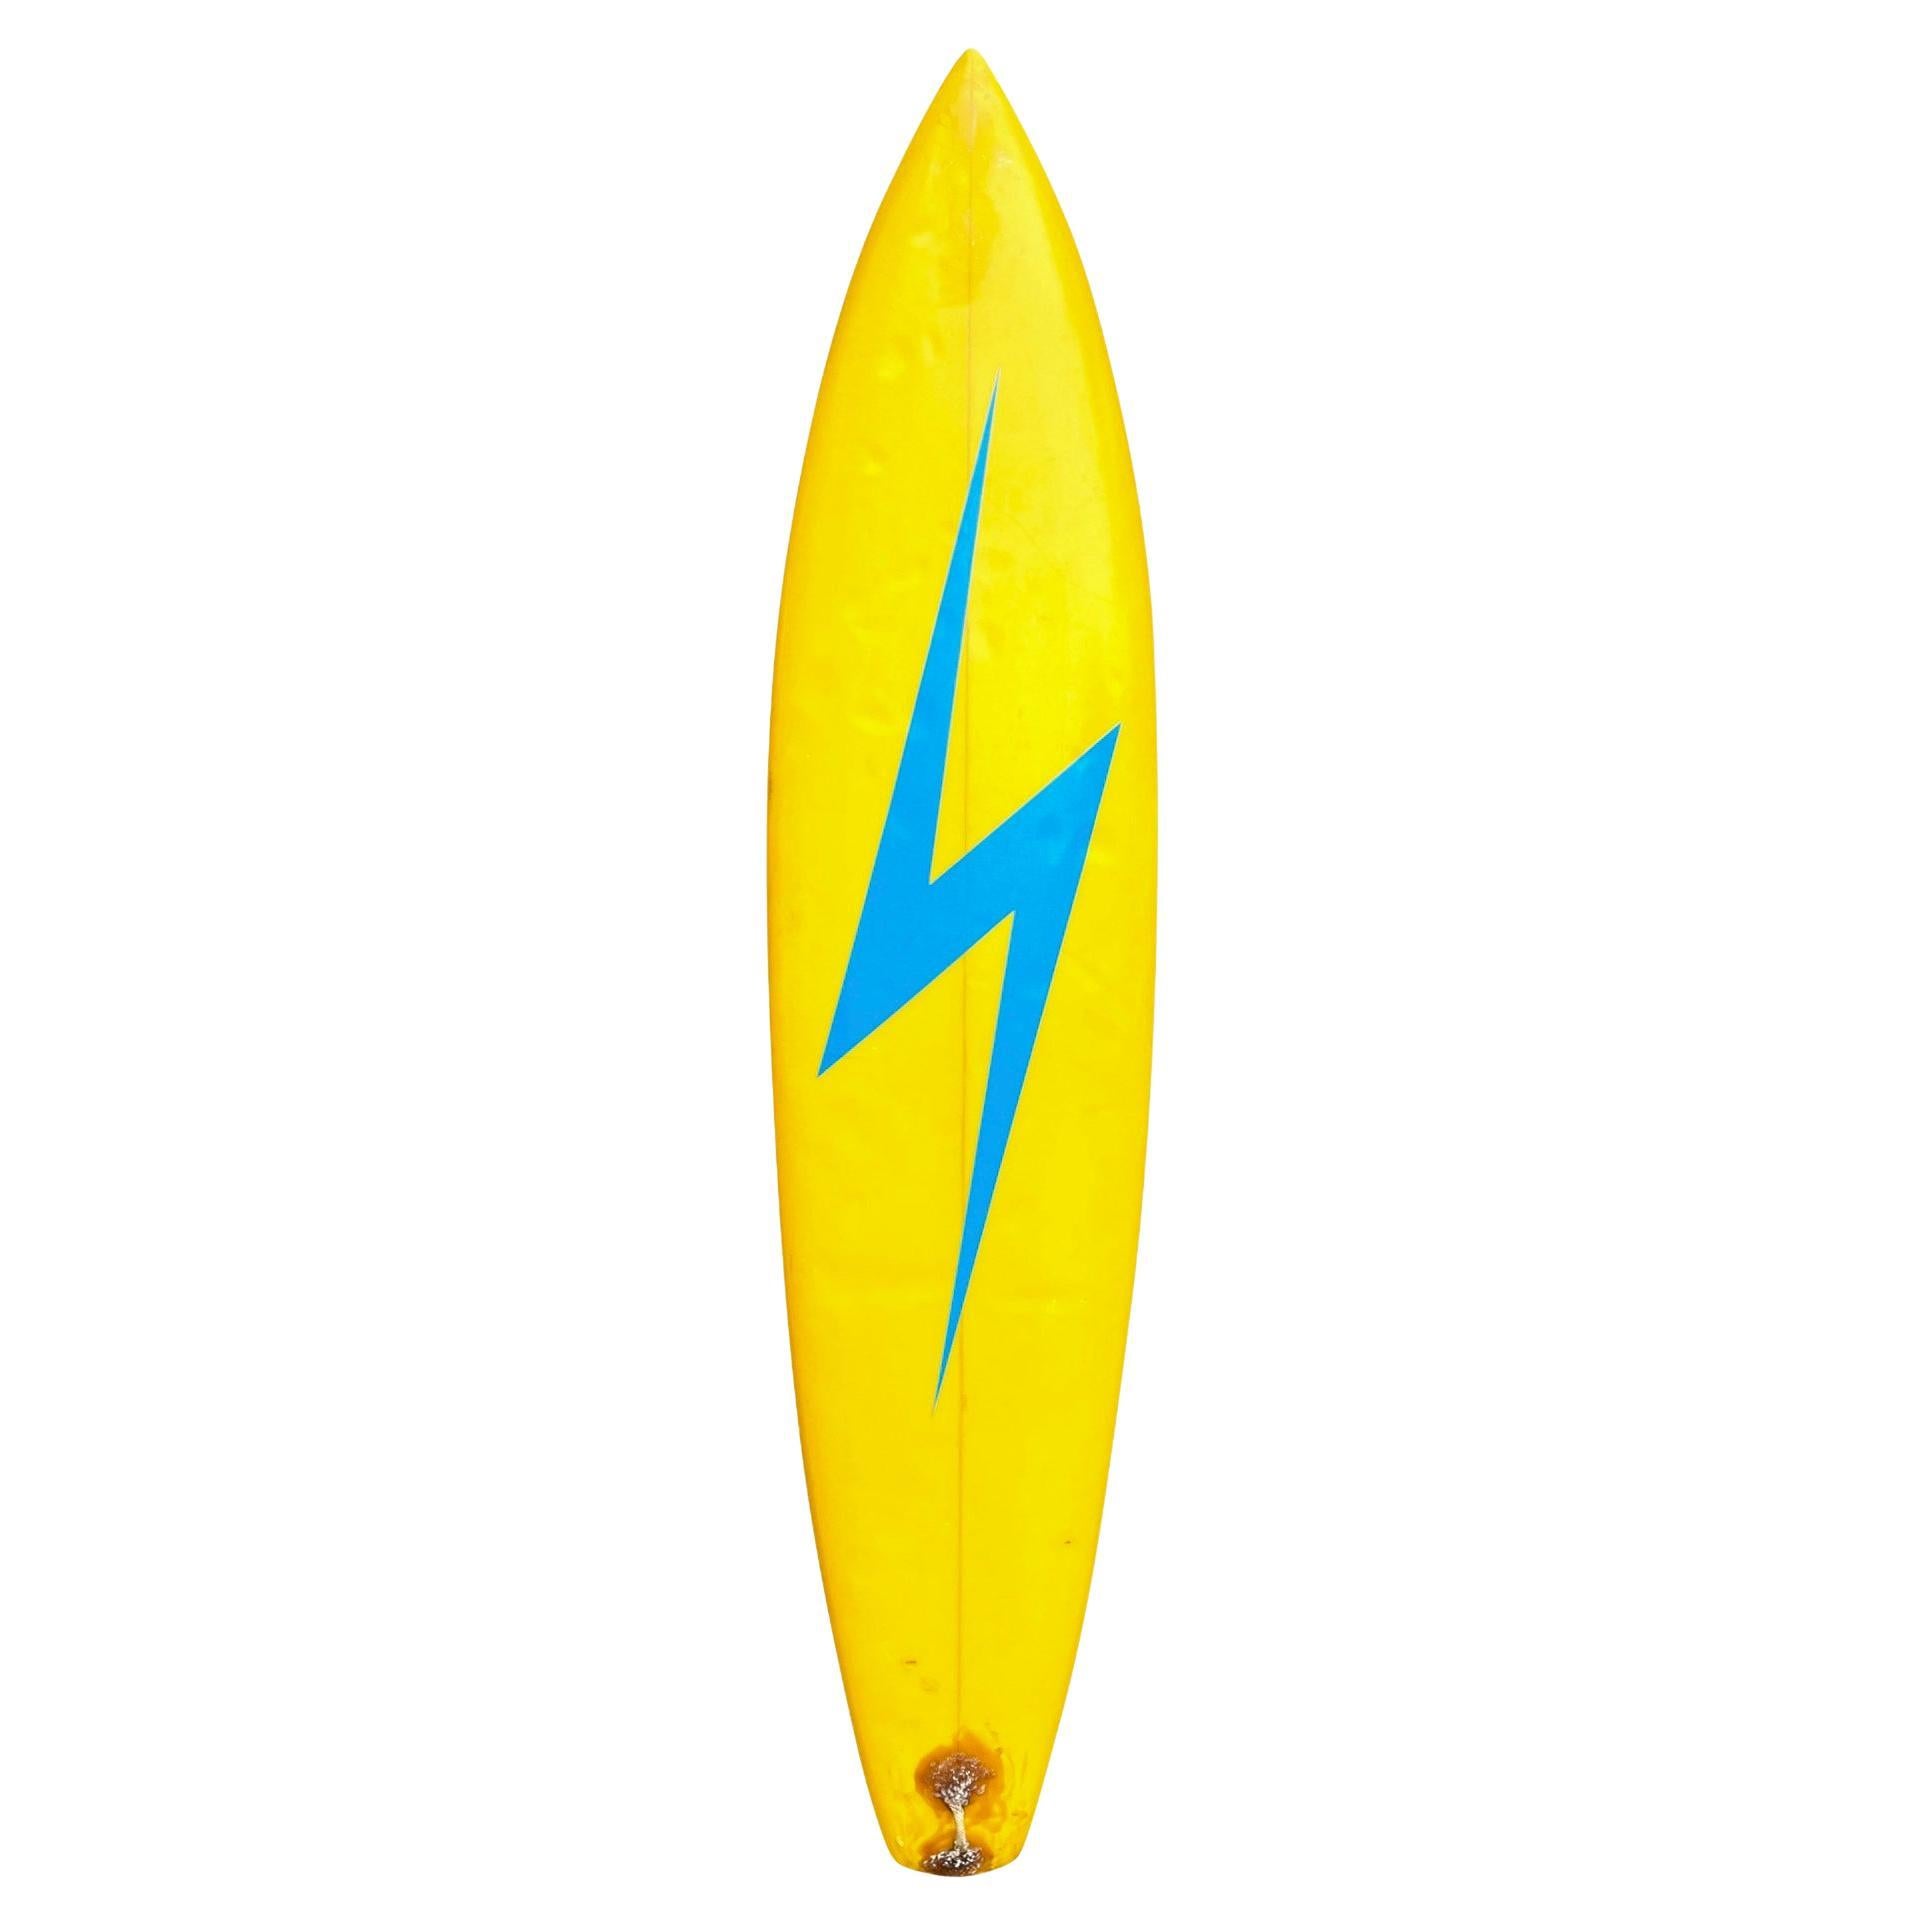 Historically Significant 1972 Lightning Bolt Surfboard Shaped by Gerry Lopez